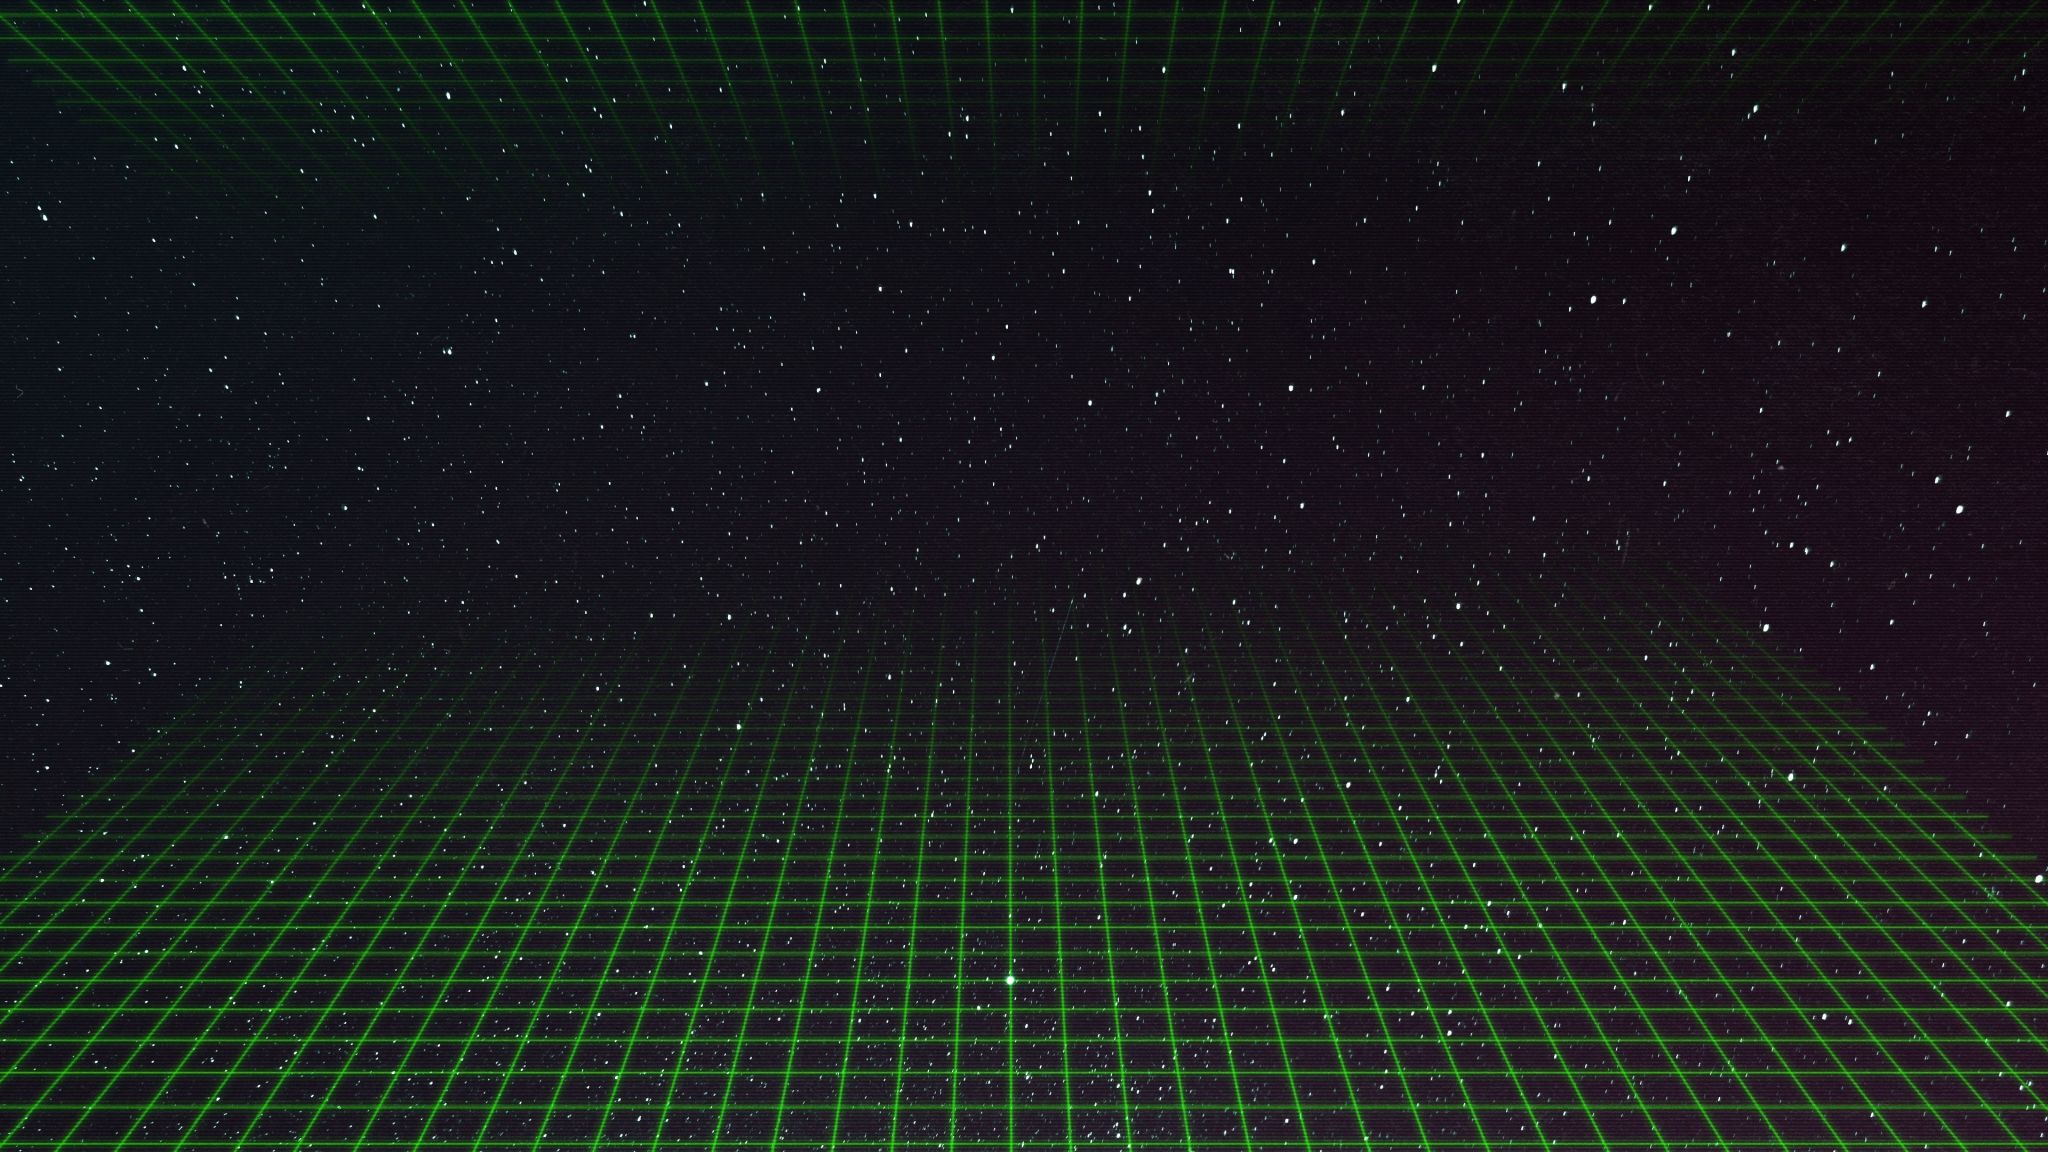 Download 2048x1152 wallpaper synthwave, green grid, dark, space, art, dual wide, widescreen, 2048x1152 HD image, background, 18152